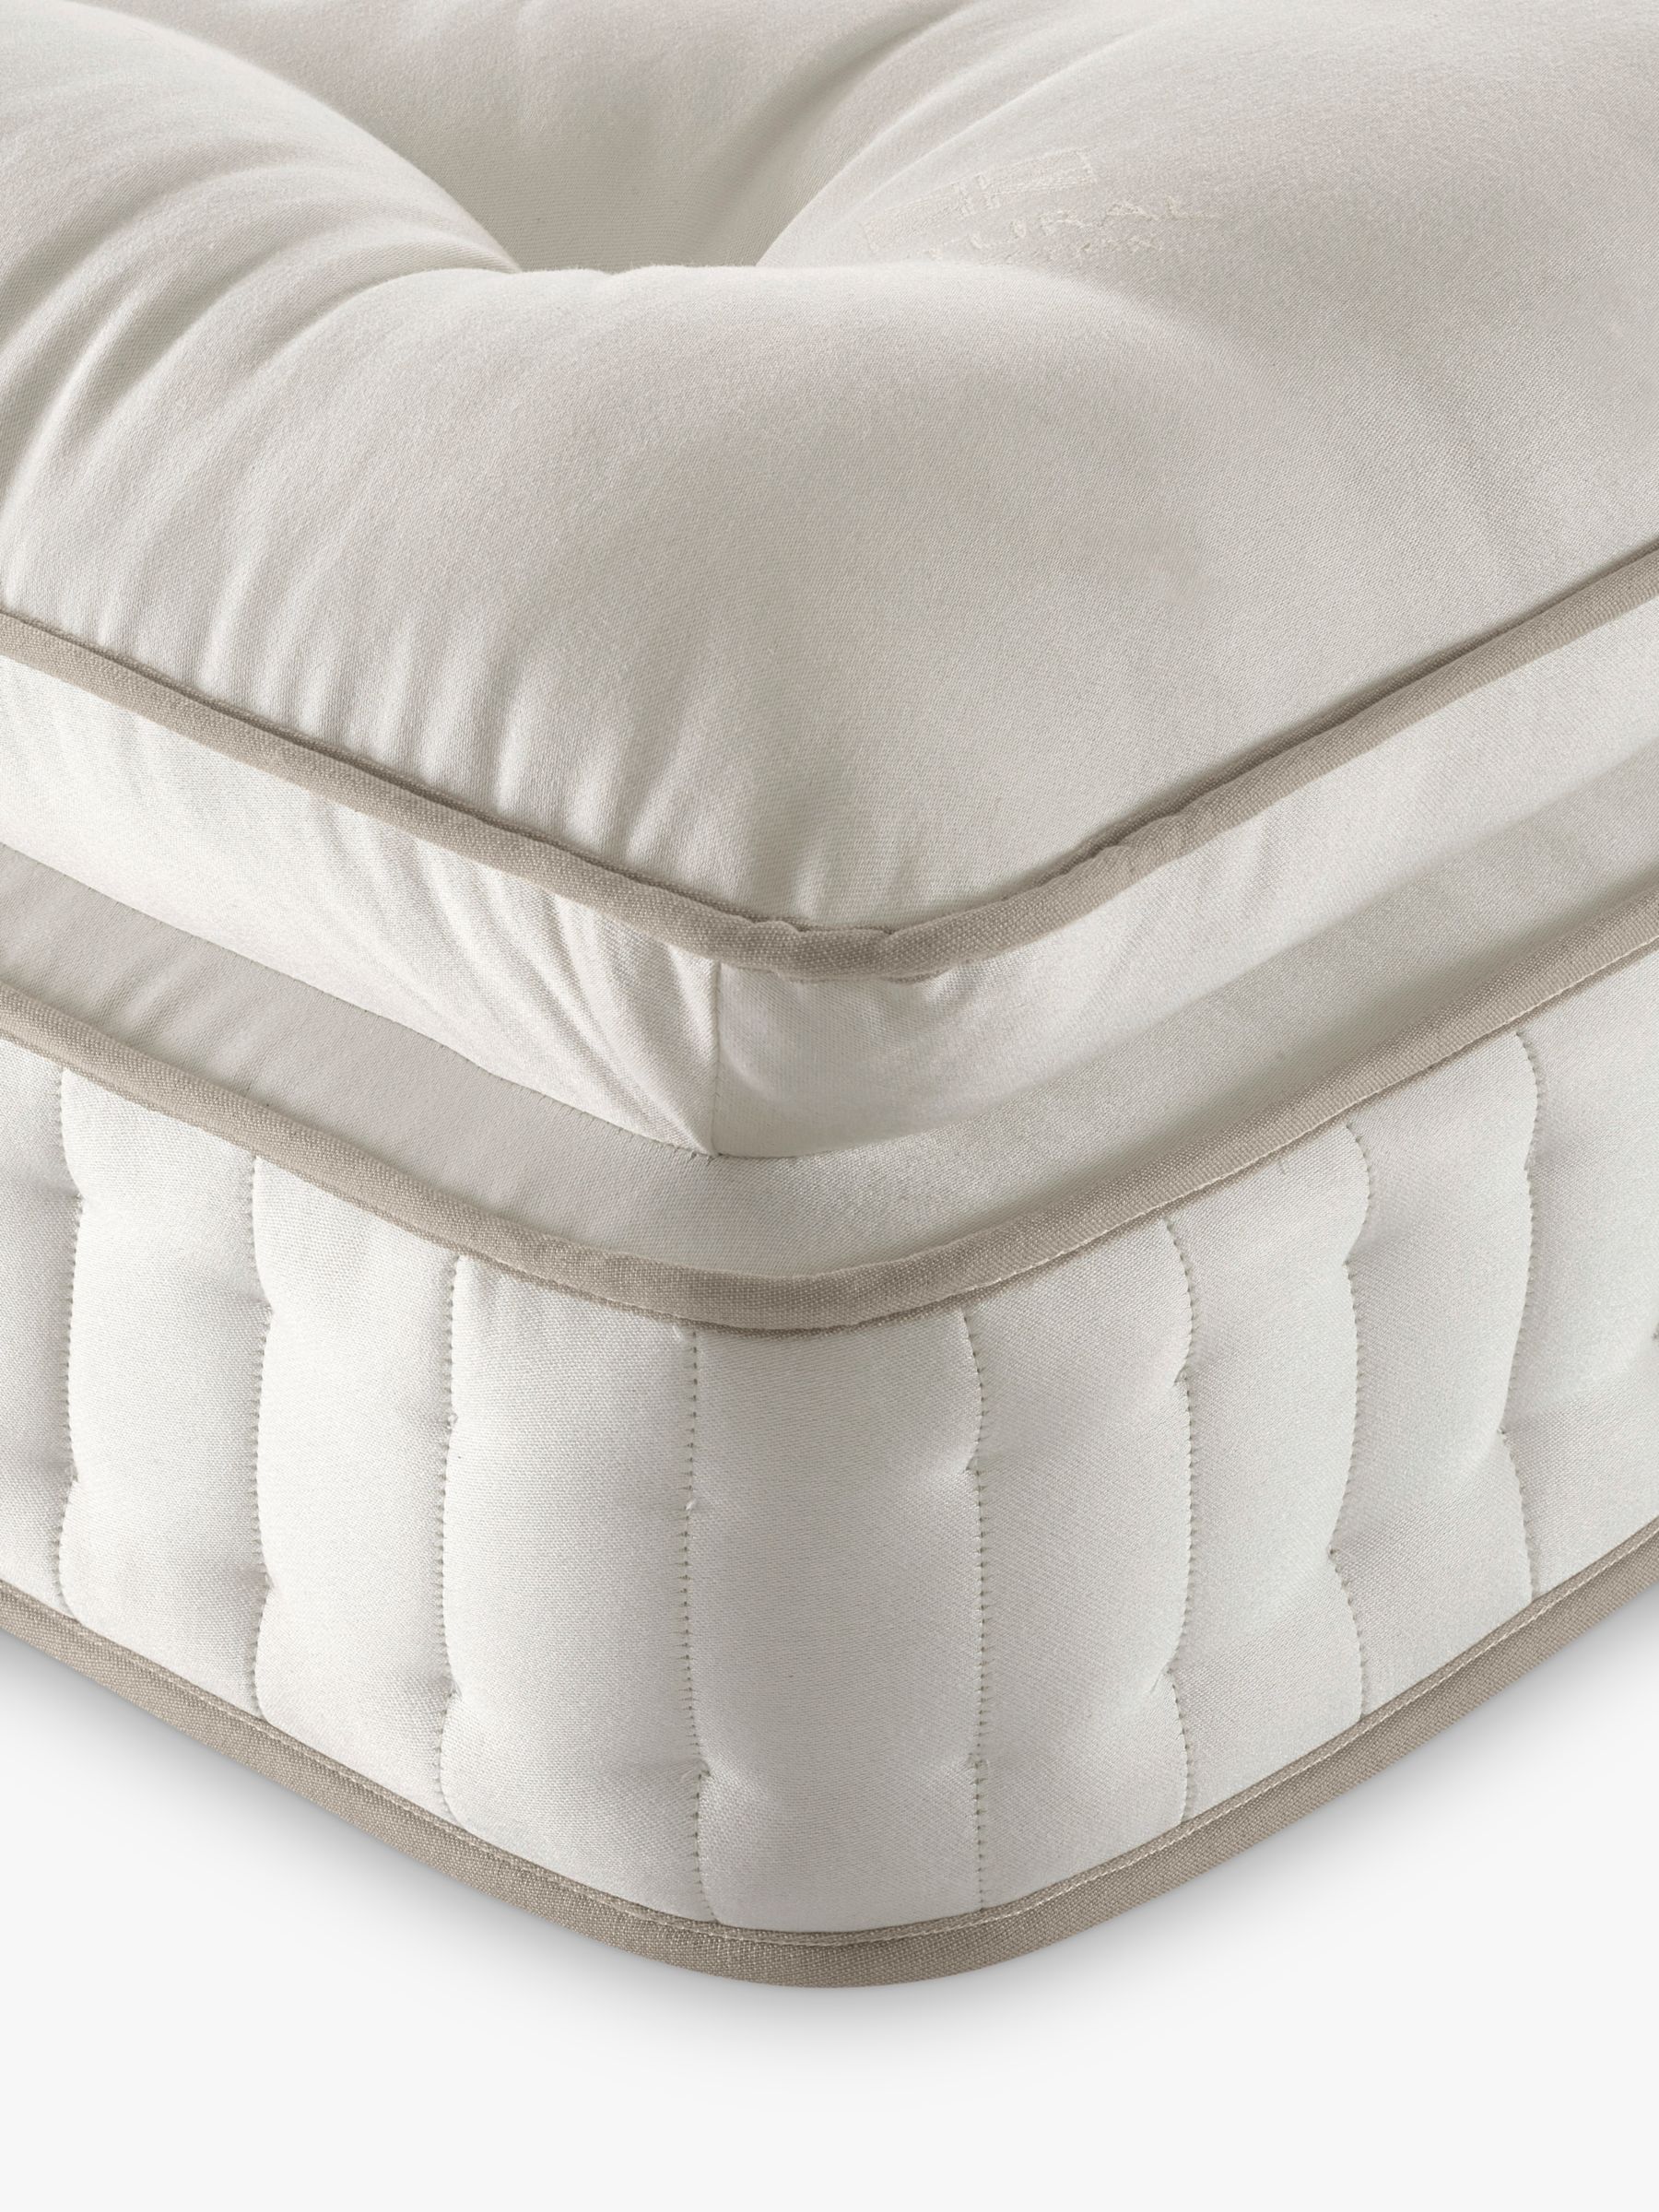 Photo of John lewis luxury natural collection egyptian cotton pillowtop 4250 king size firmer tension pocket spring zip link mattress